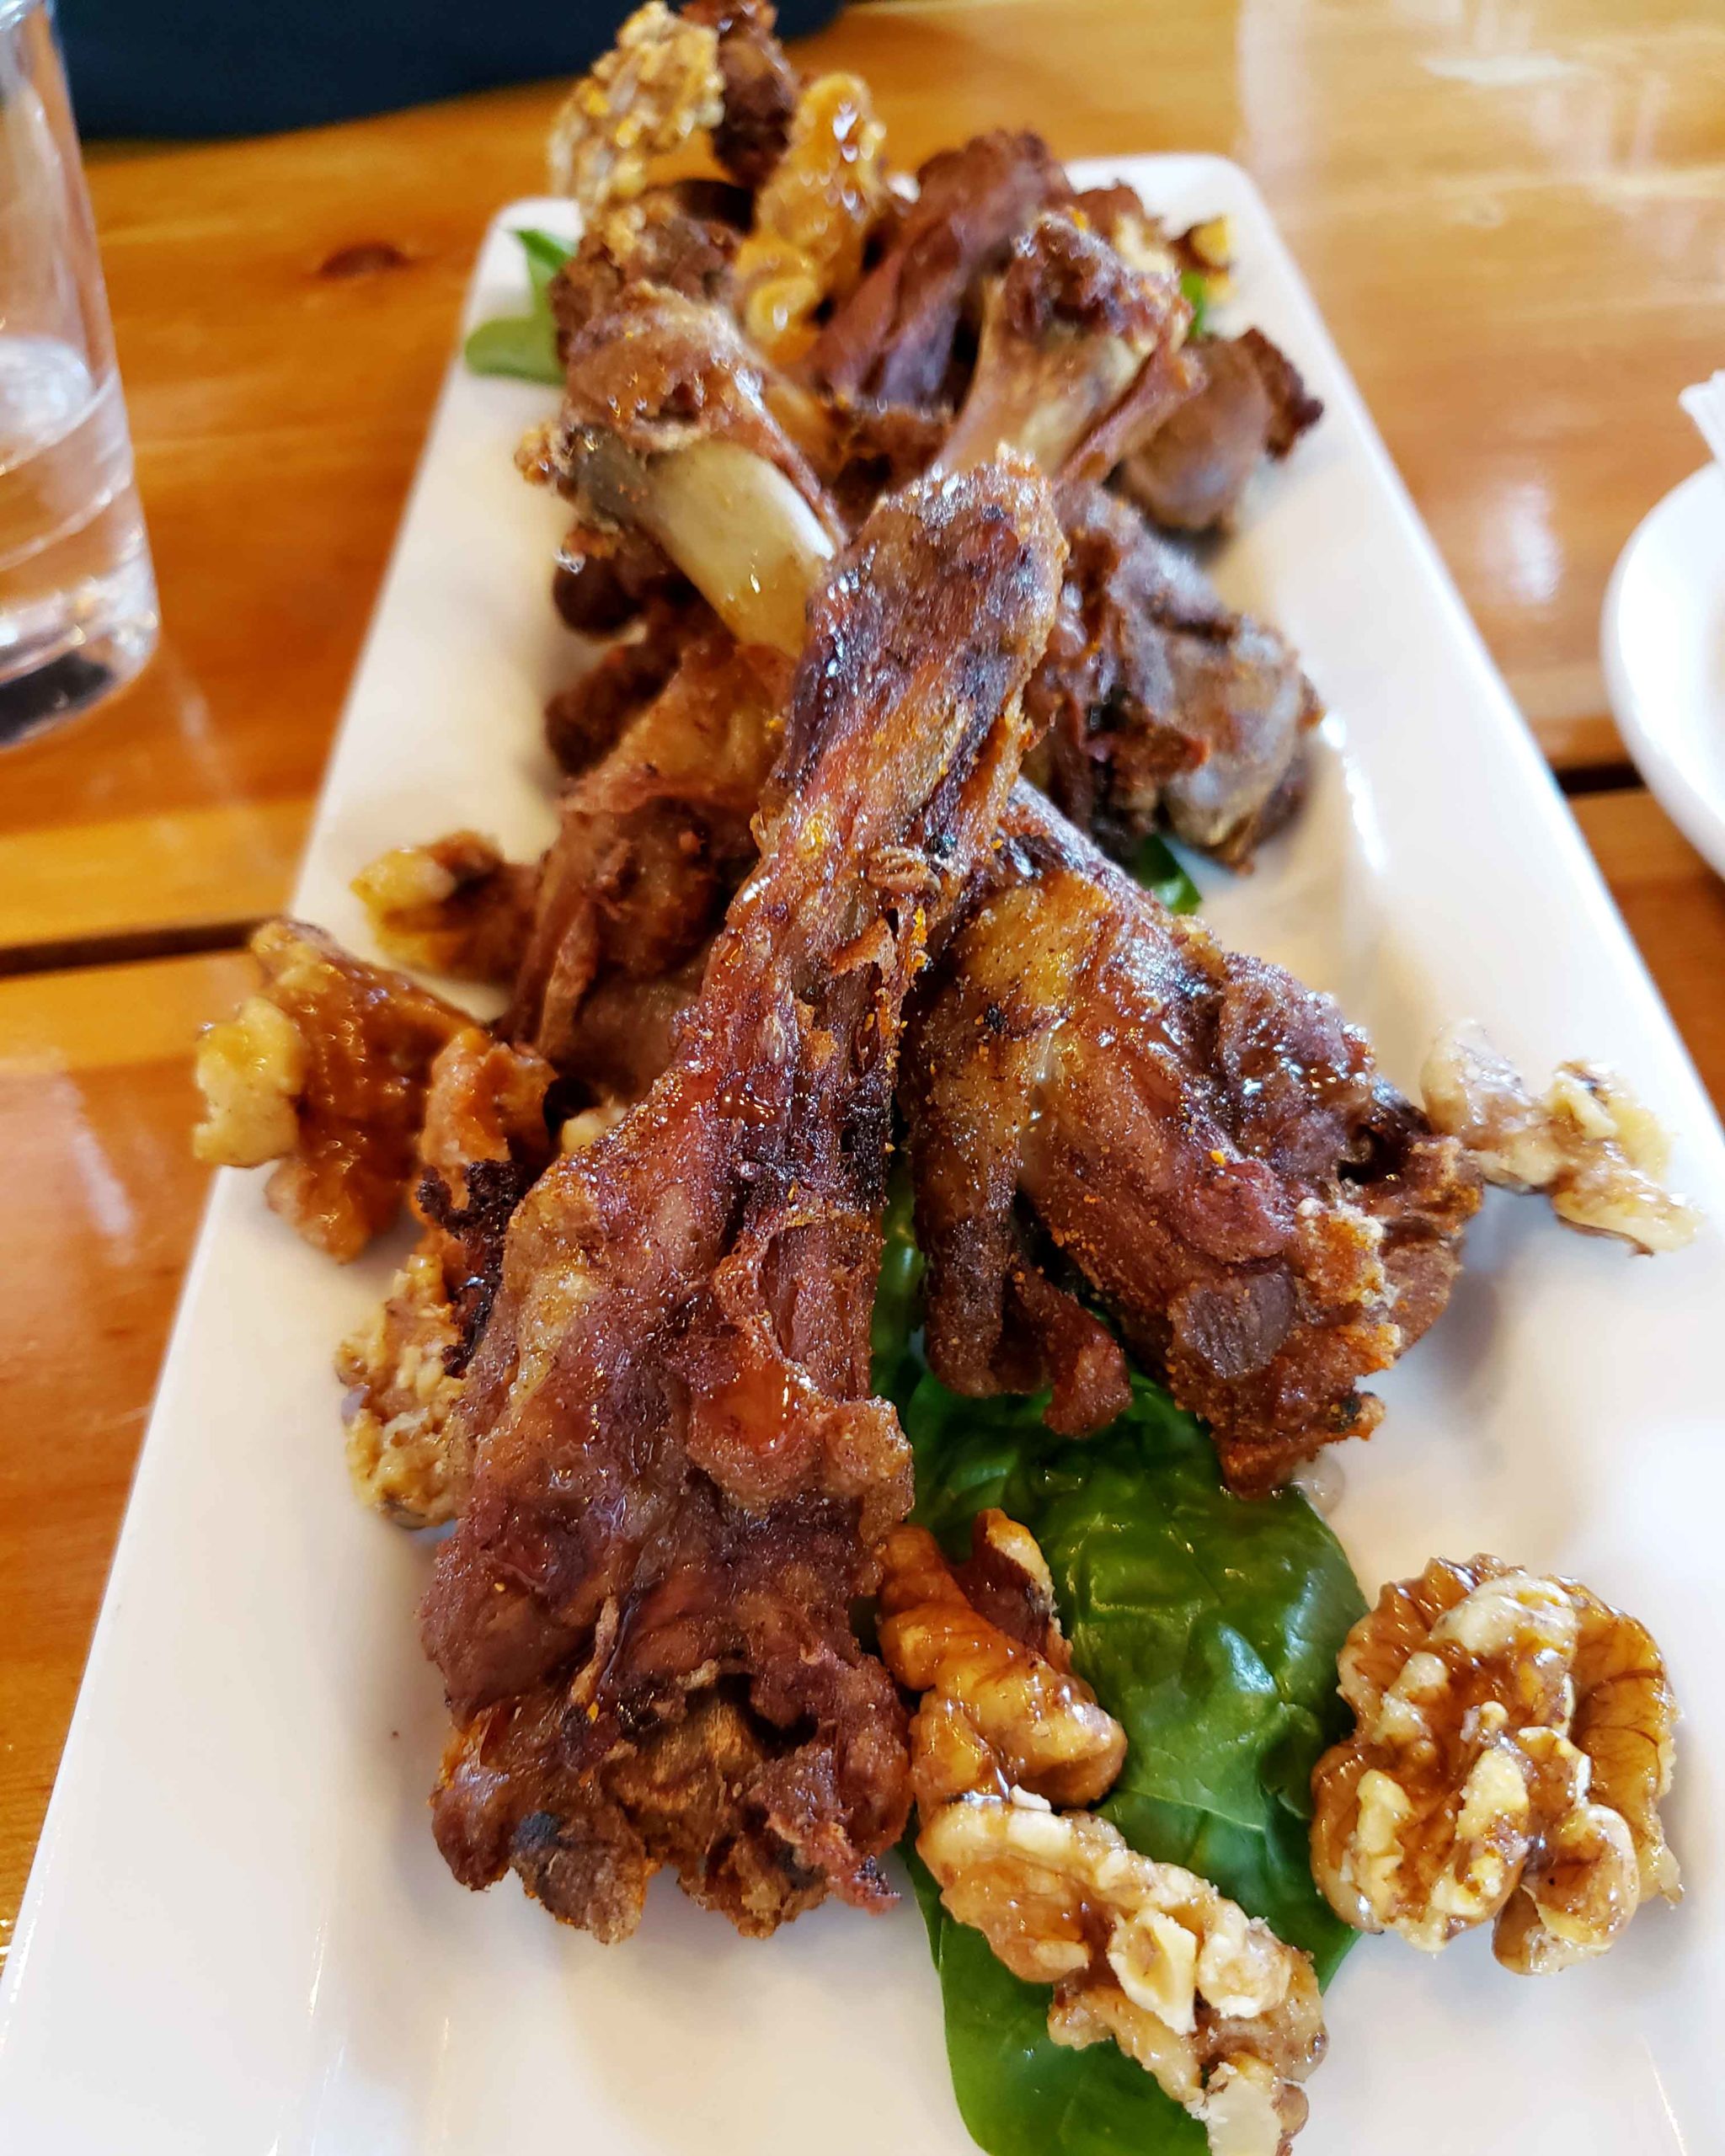 An appetizer of duck wings ordered during lunch at the Iron Goat